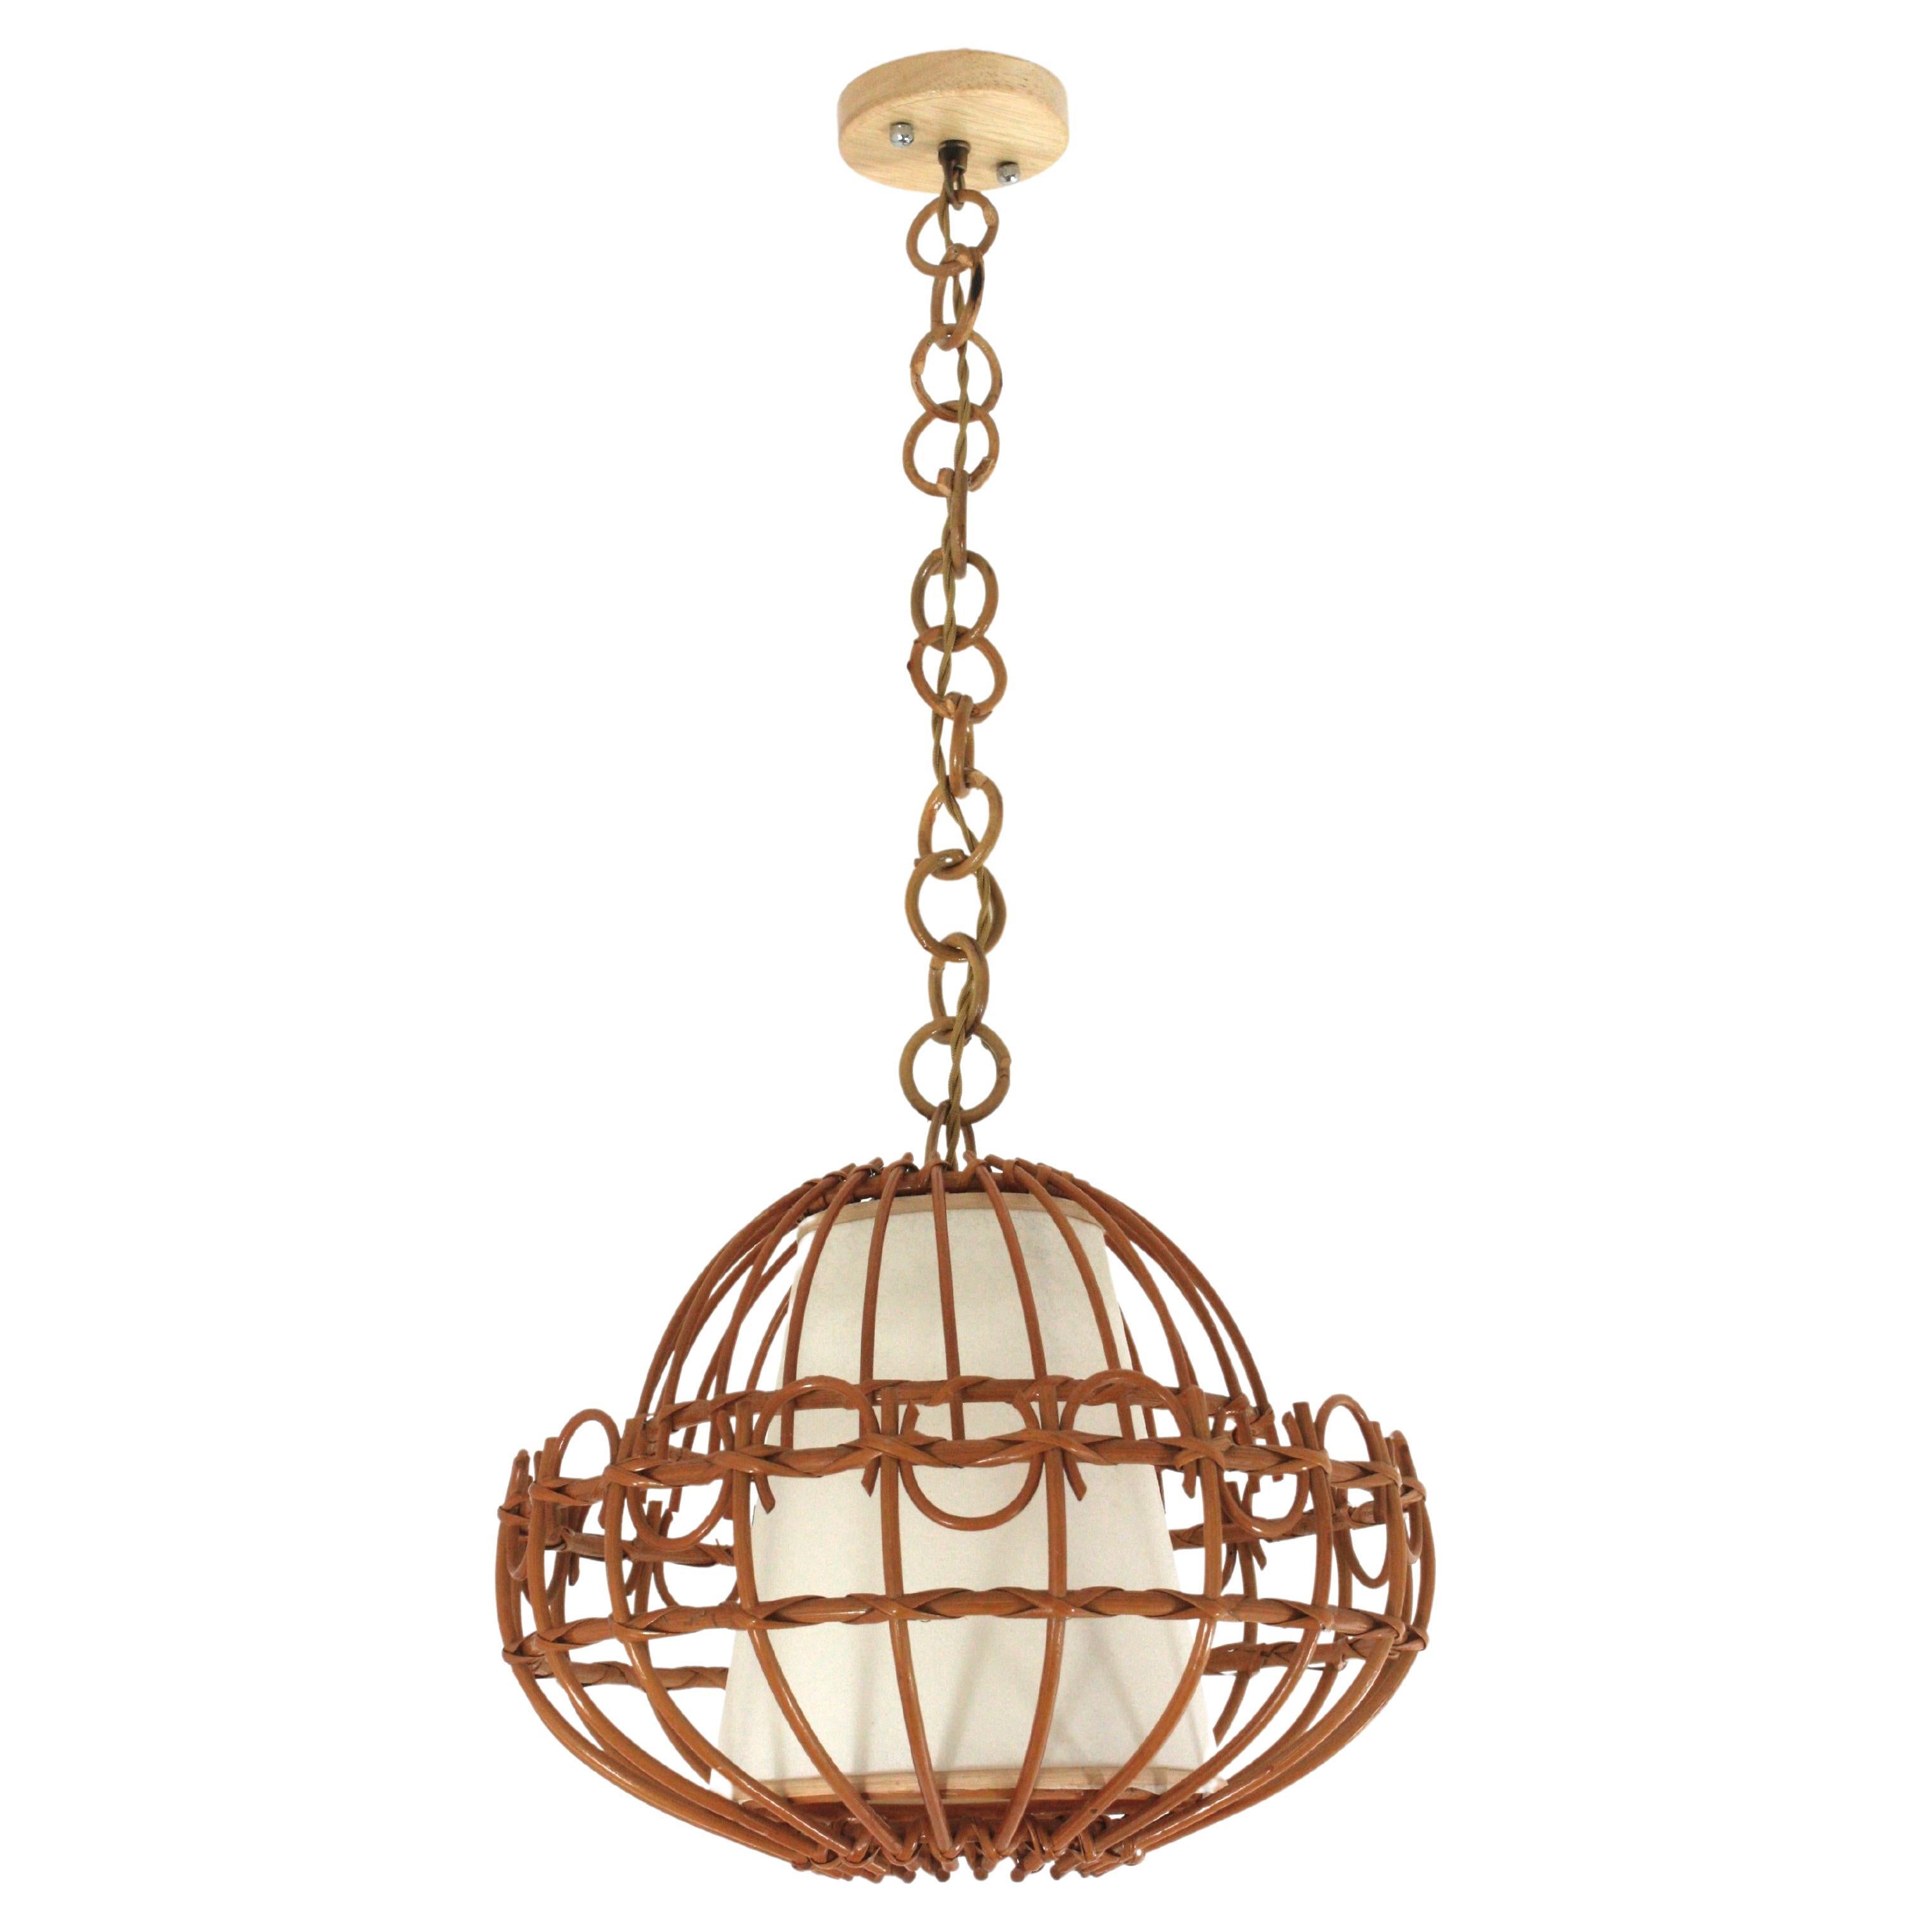 A cool handcrafted rattan large ceiling pendant hanging light with chinoiserie accents, Spain, 1960s.
This large lantern has an eye-catching design featuring a semi-spherical rattan structure decorated by chinoiserie accents and semi rings